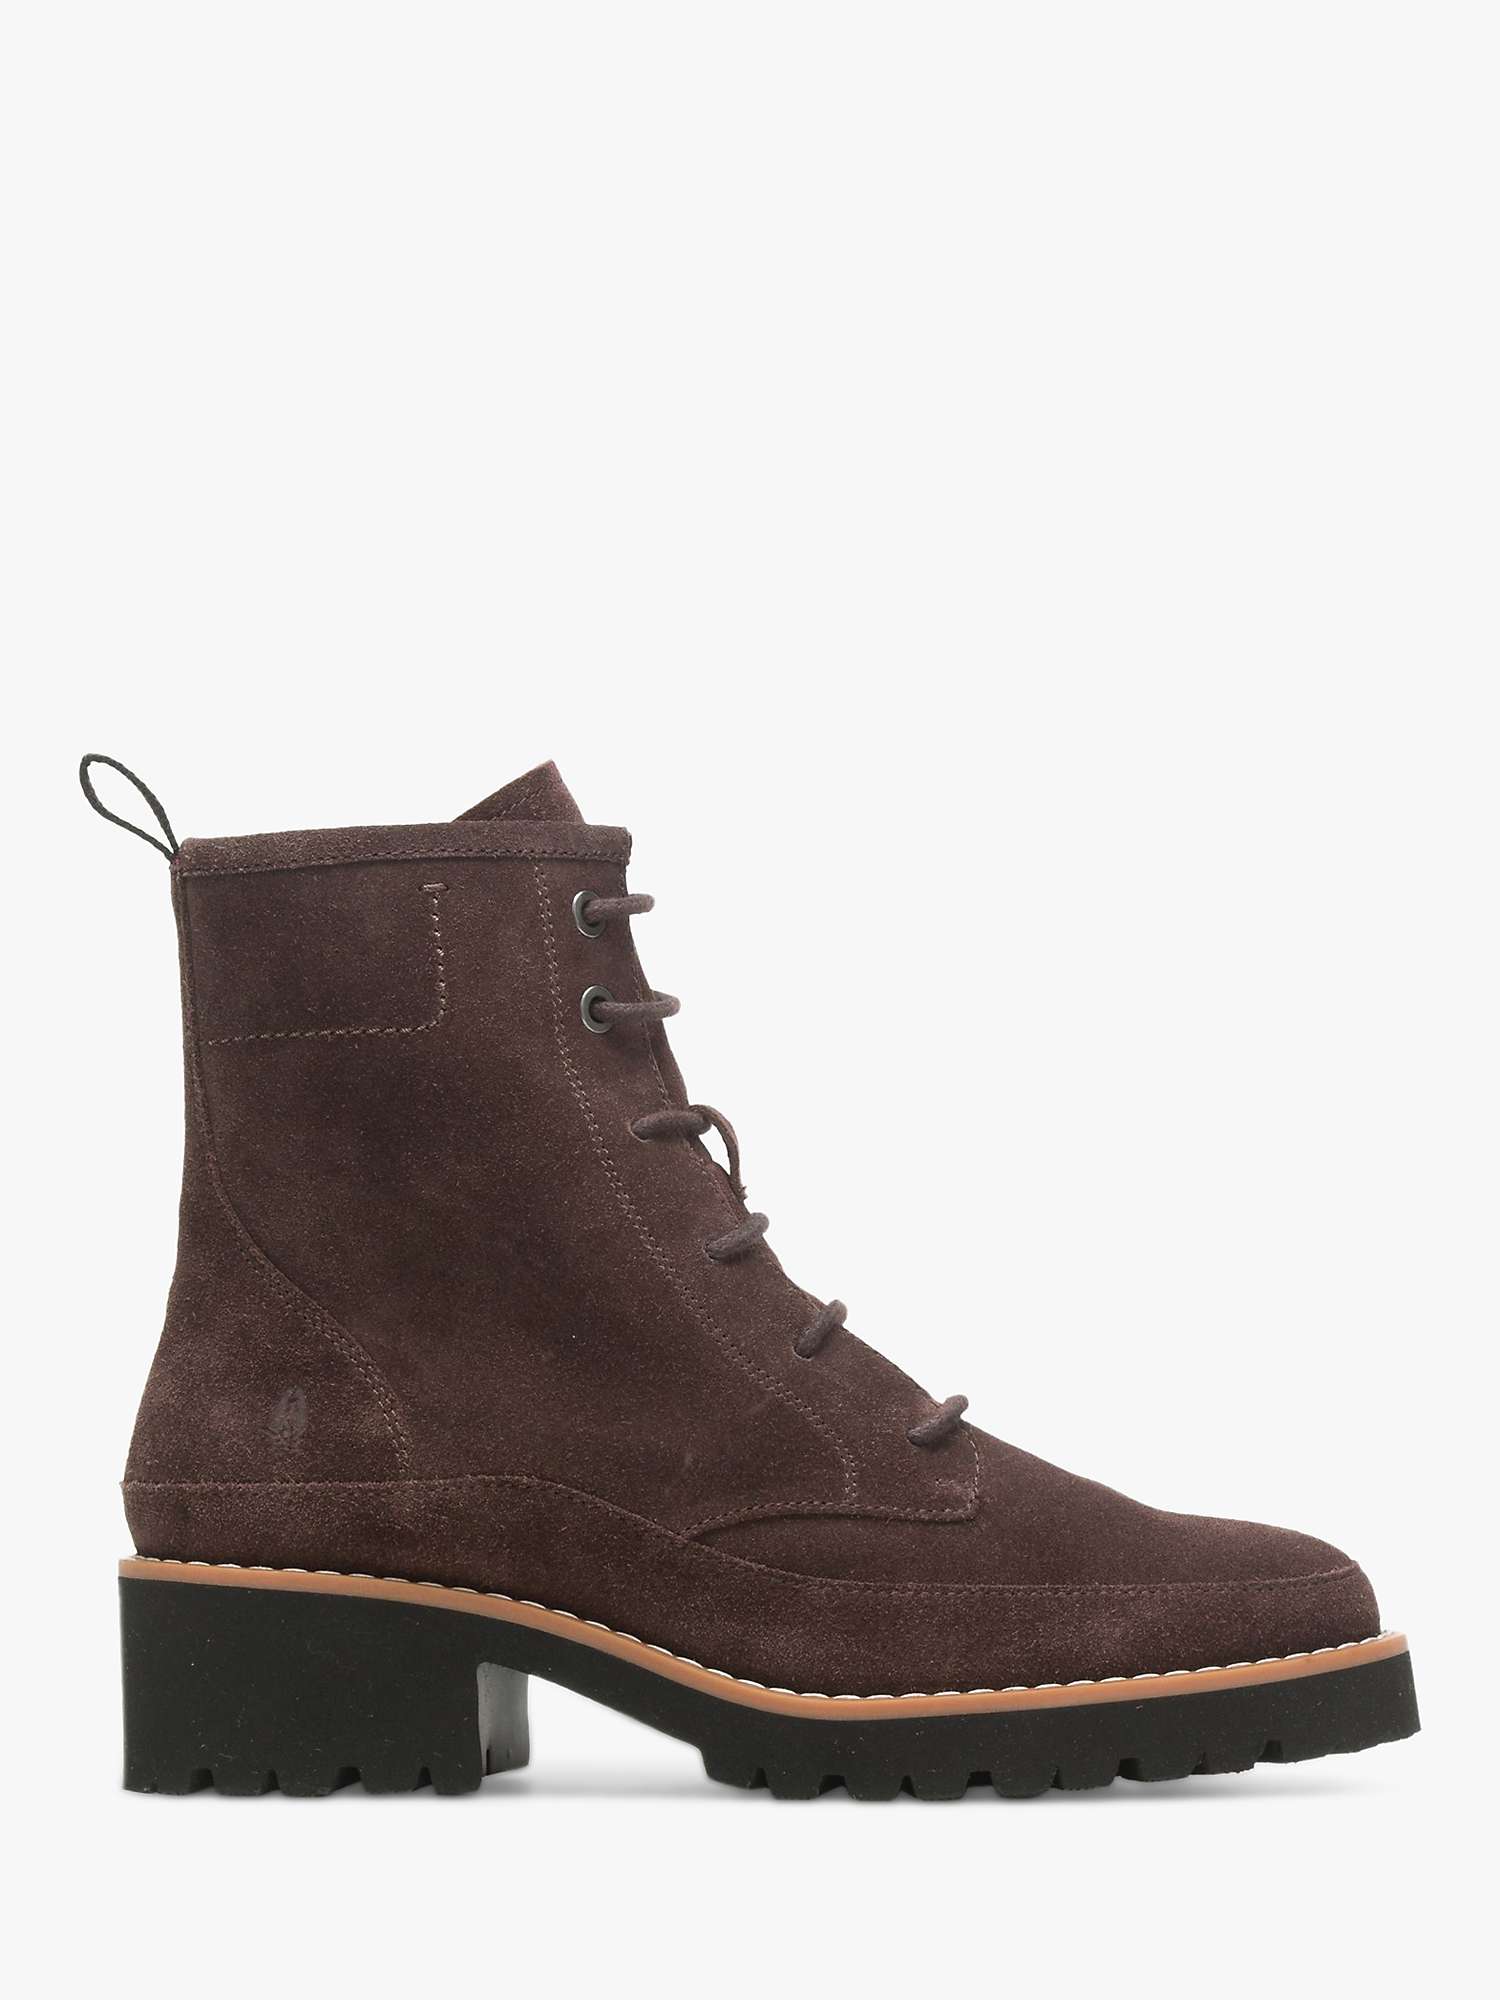 Hush Puppies Amelia Suede Lace Boots, Brown at John Lewis & Partners